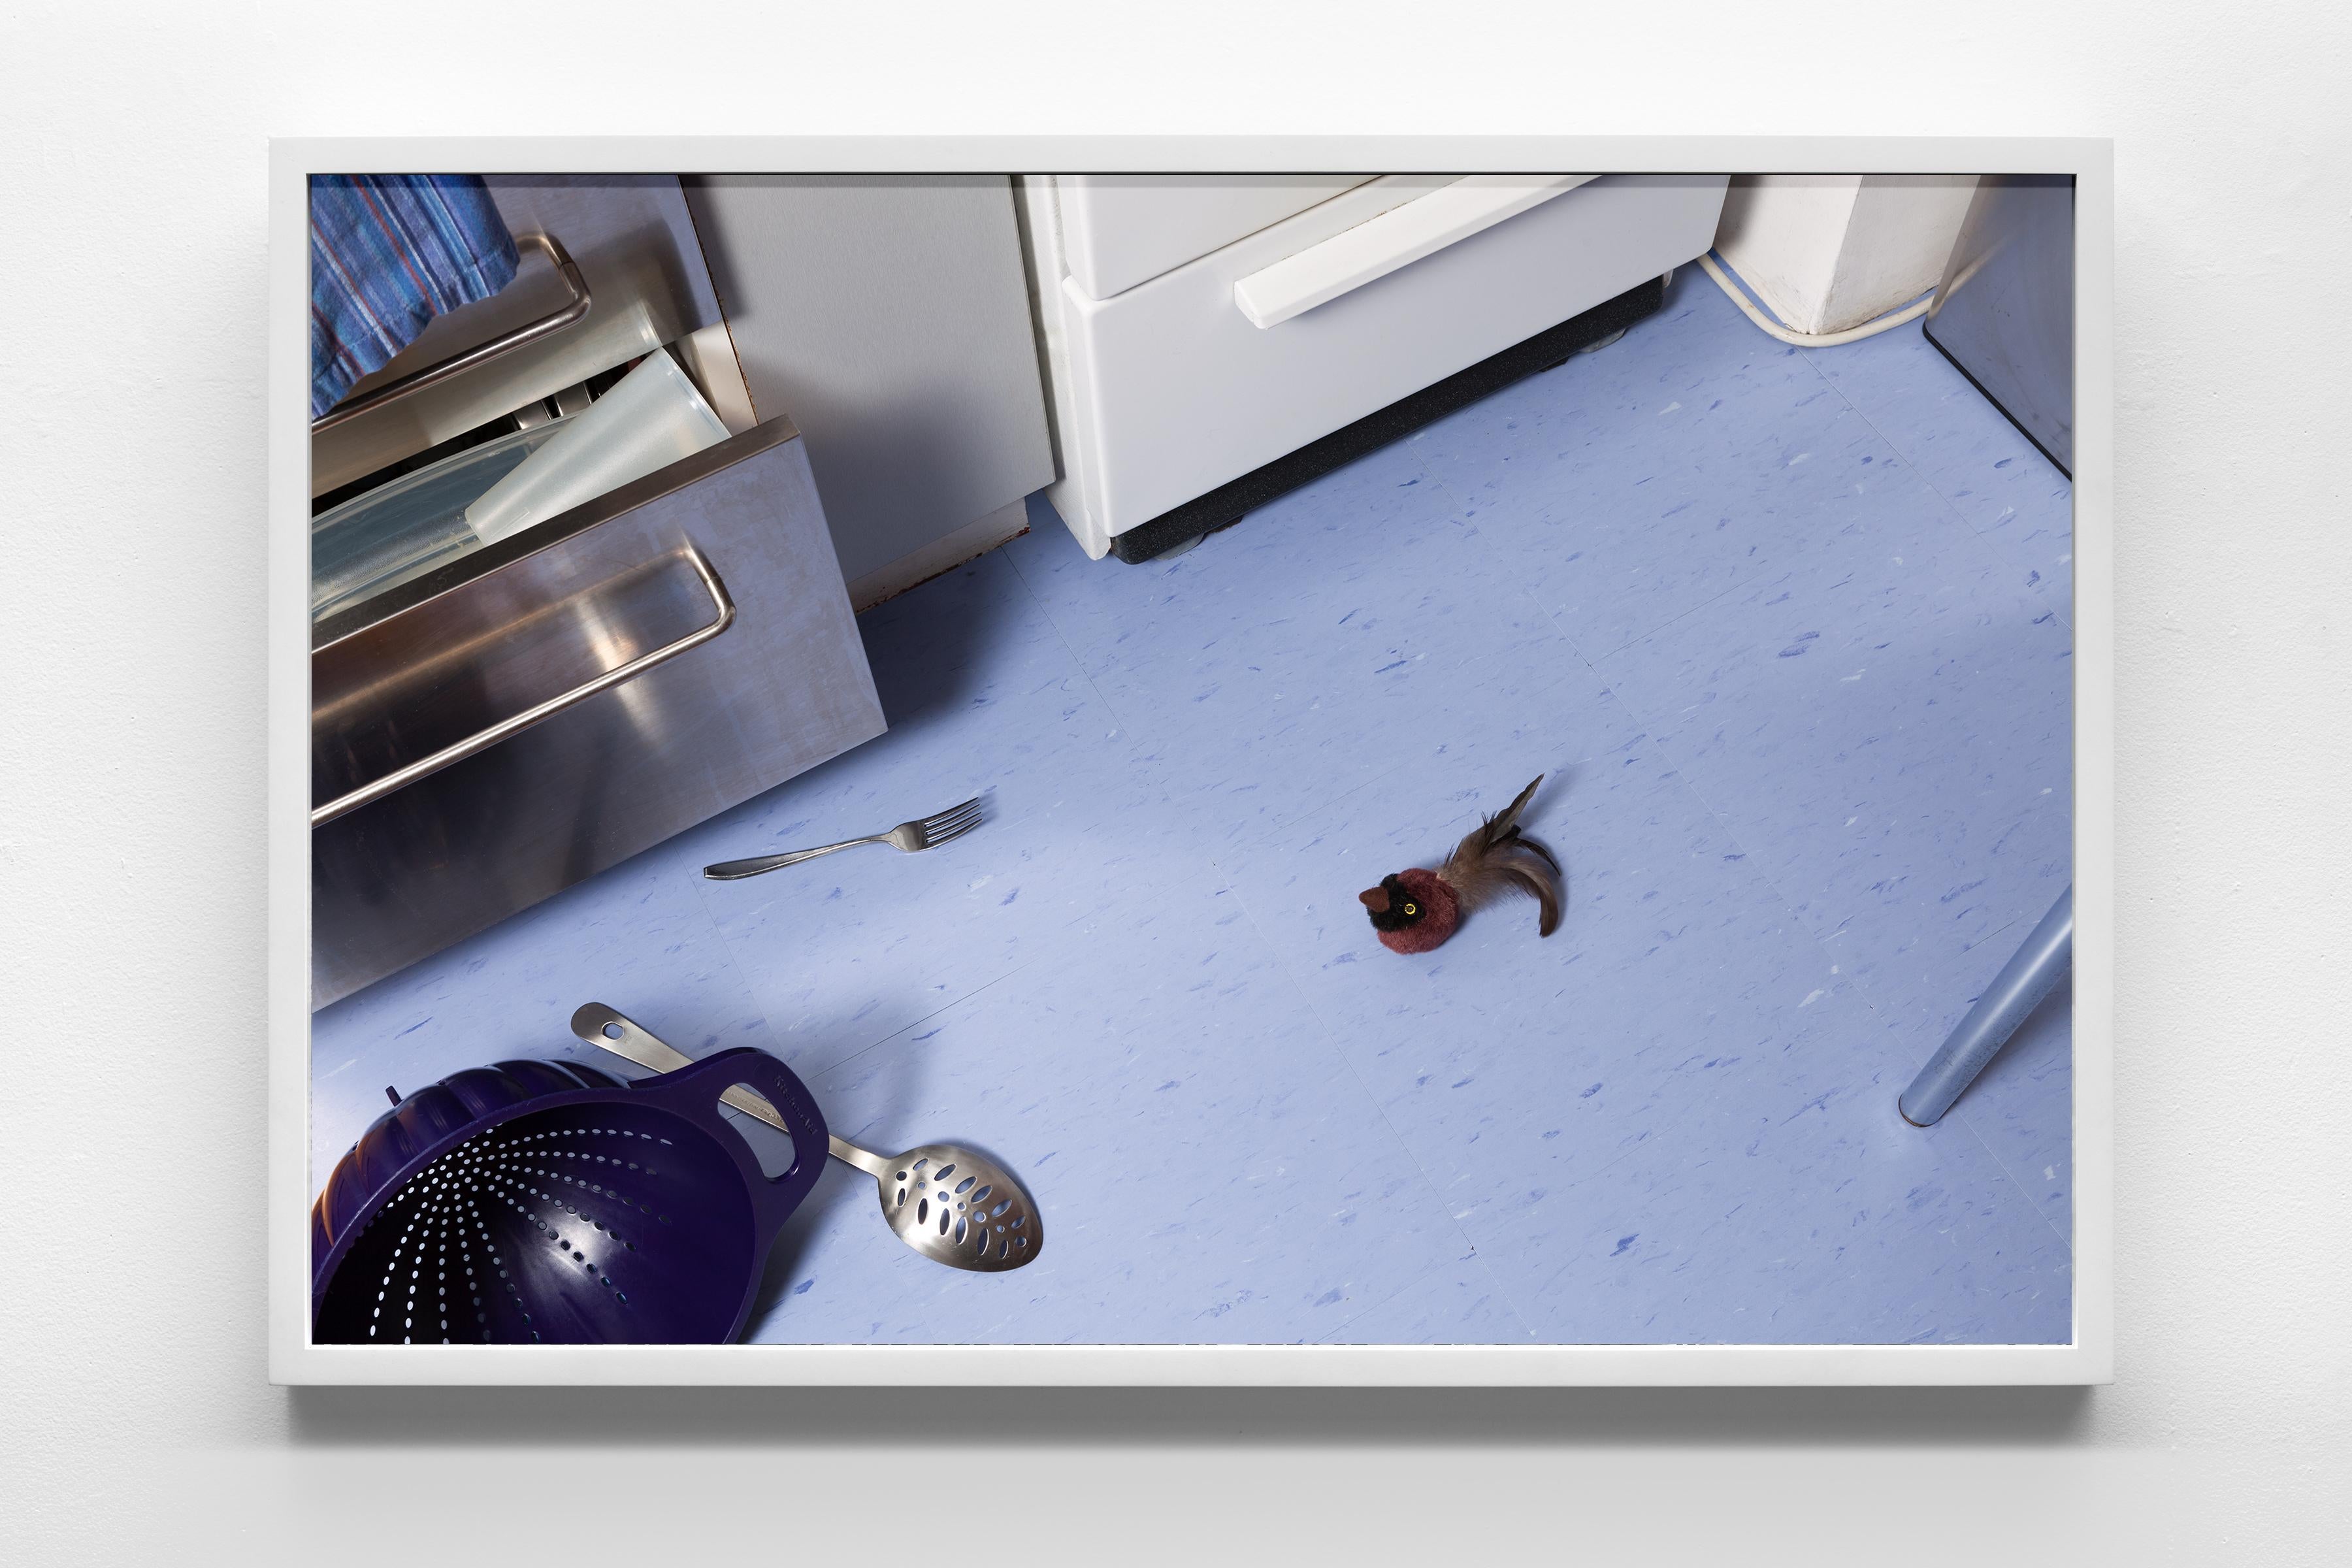 “Morbidity & Mortality: Bird Head” Humorous Photo of Cat Toy in Crime Scene  - Contemporary Print by Jeanette May